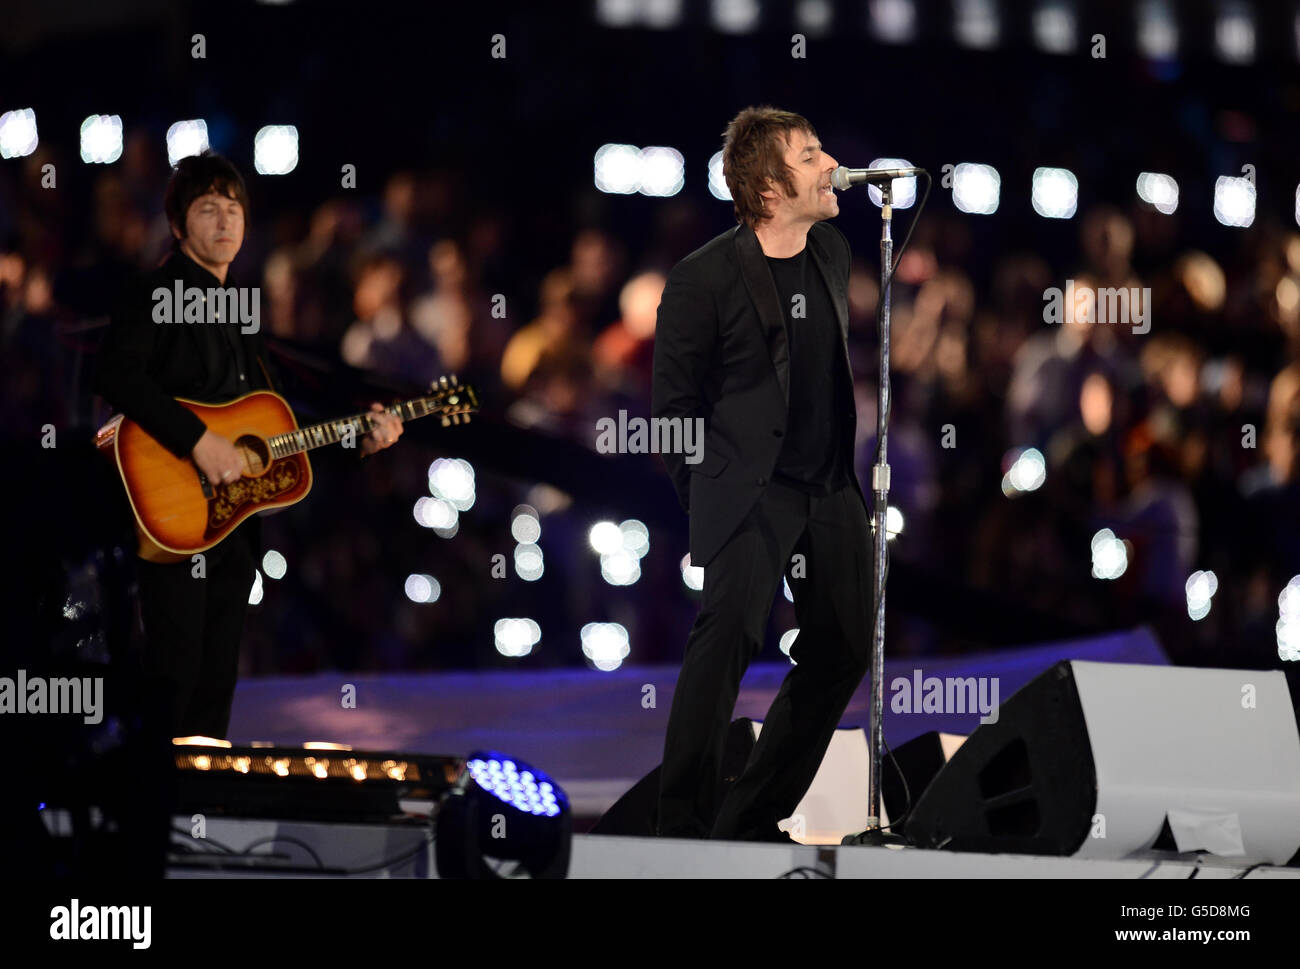 London Olympic Games - Day 16. Liam Gallagher performs during the